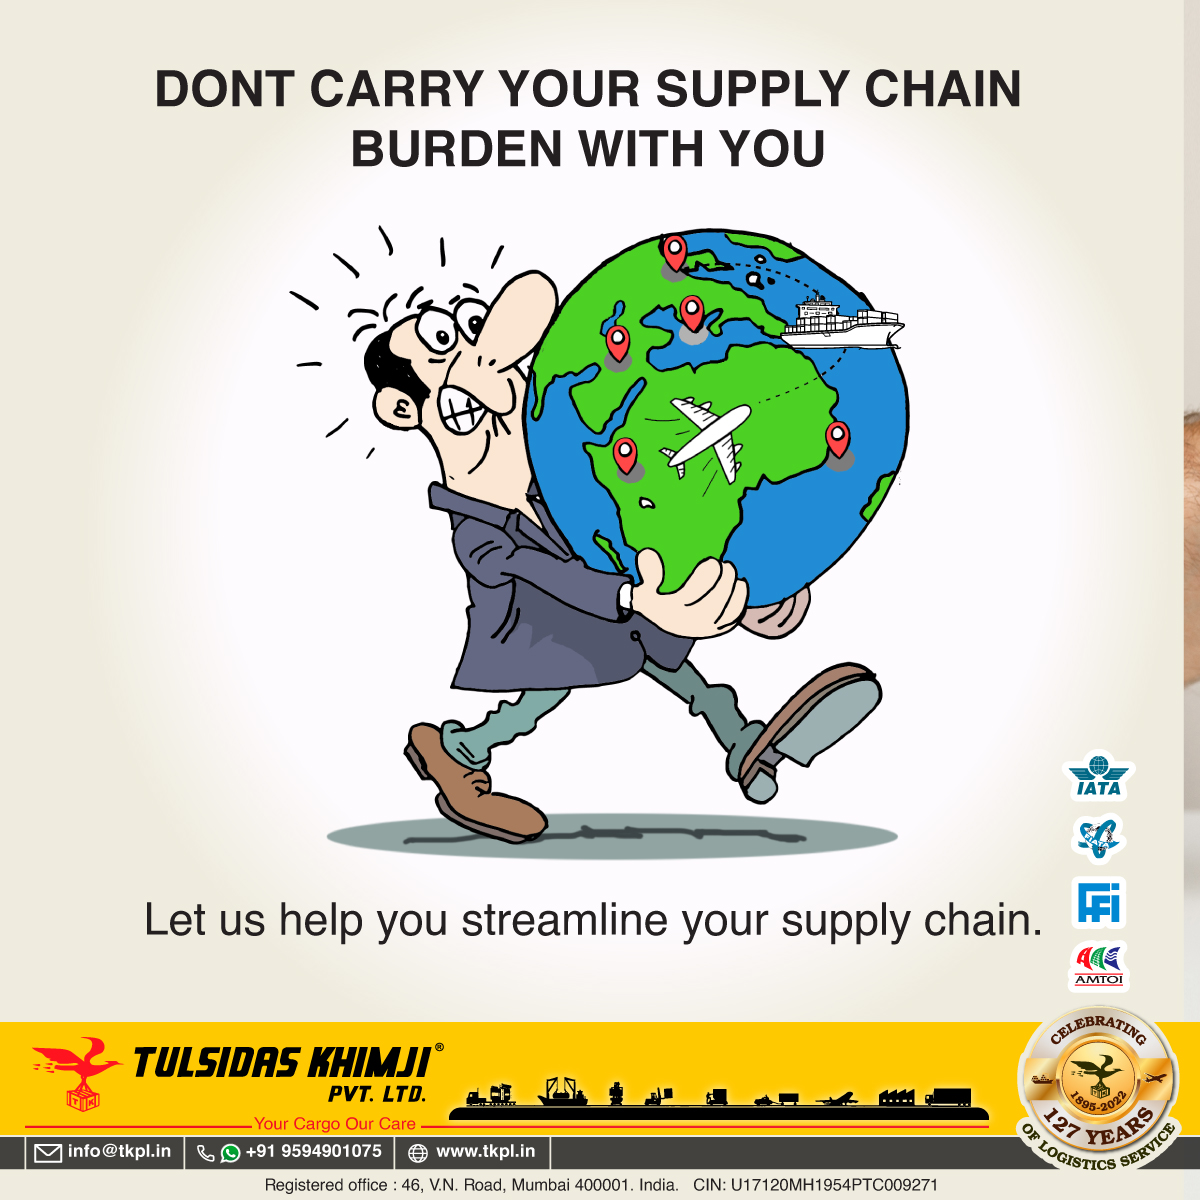 DONT CARRY YOUR SUPPLY CHAIN BURDEN WITH YOU
#SupplyChainRelief  #StreamlinedSupplyChain 
#logistics #shipping #logisticsolutions #freightforwarding #customsclearance #globallogistics #dangerousgoodscargo #costeffectivelogisticssolutions #projectcargo #ODC